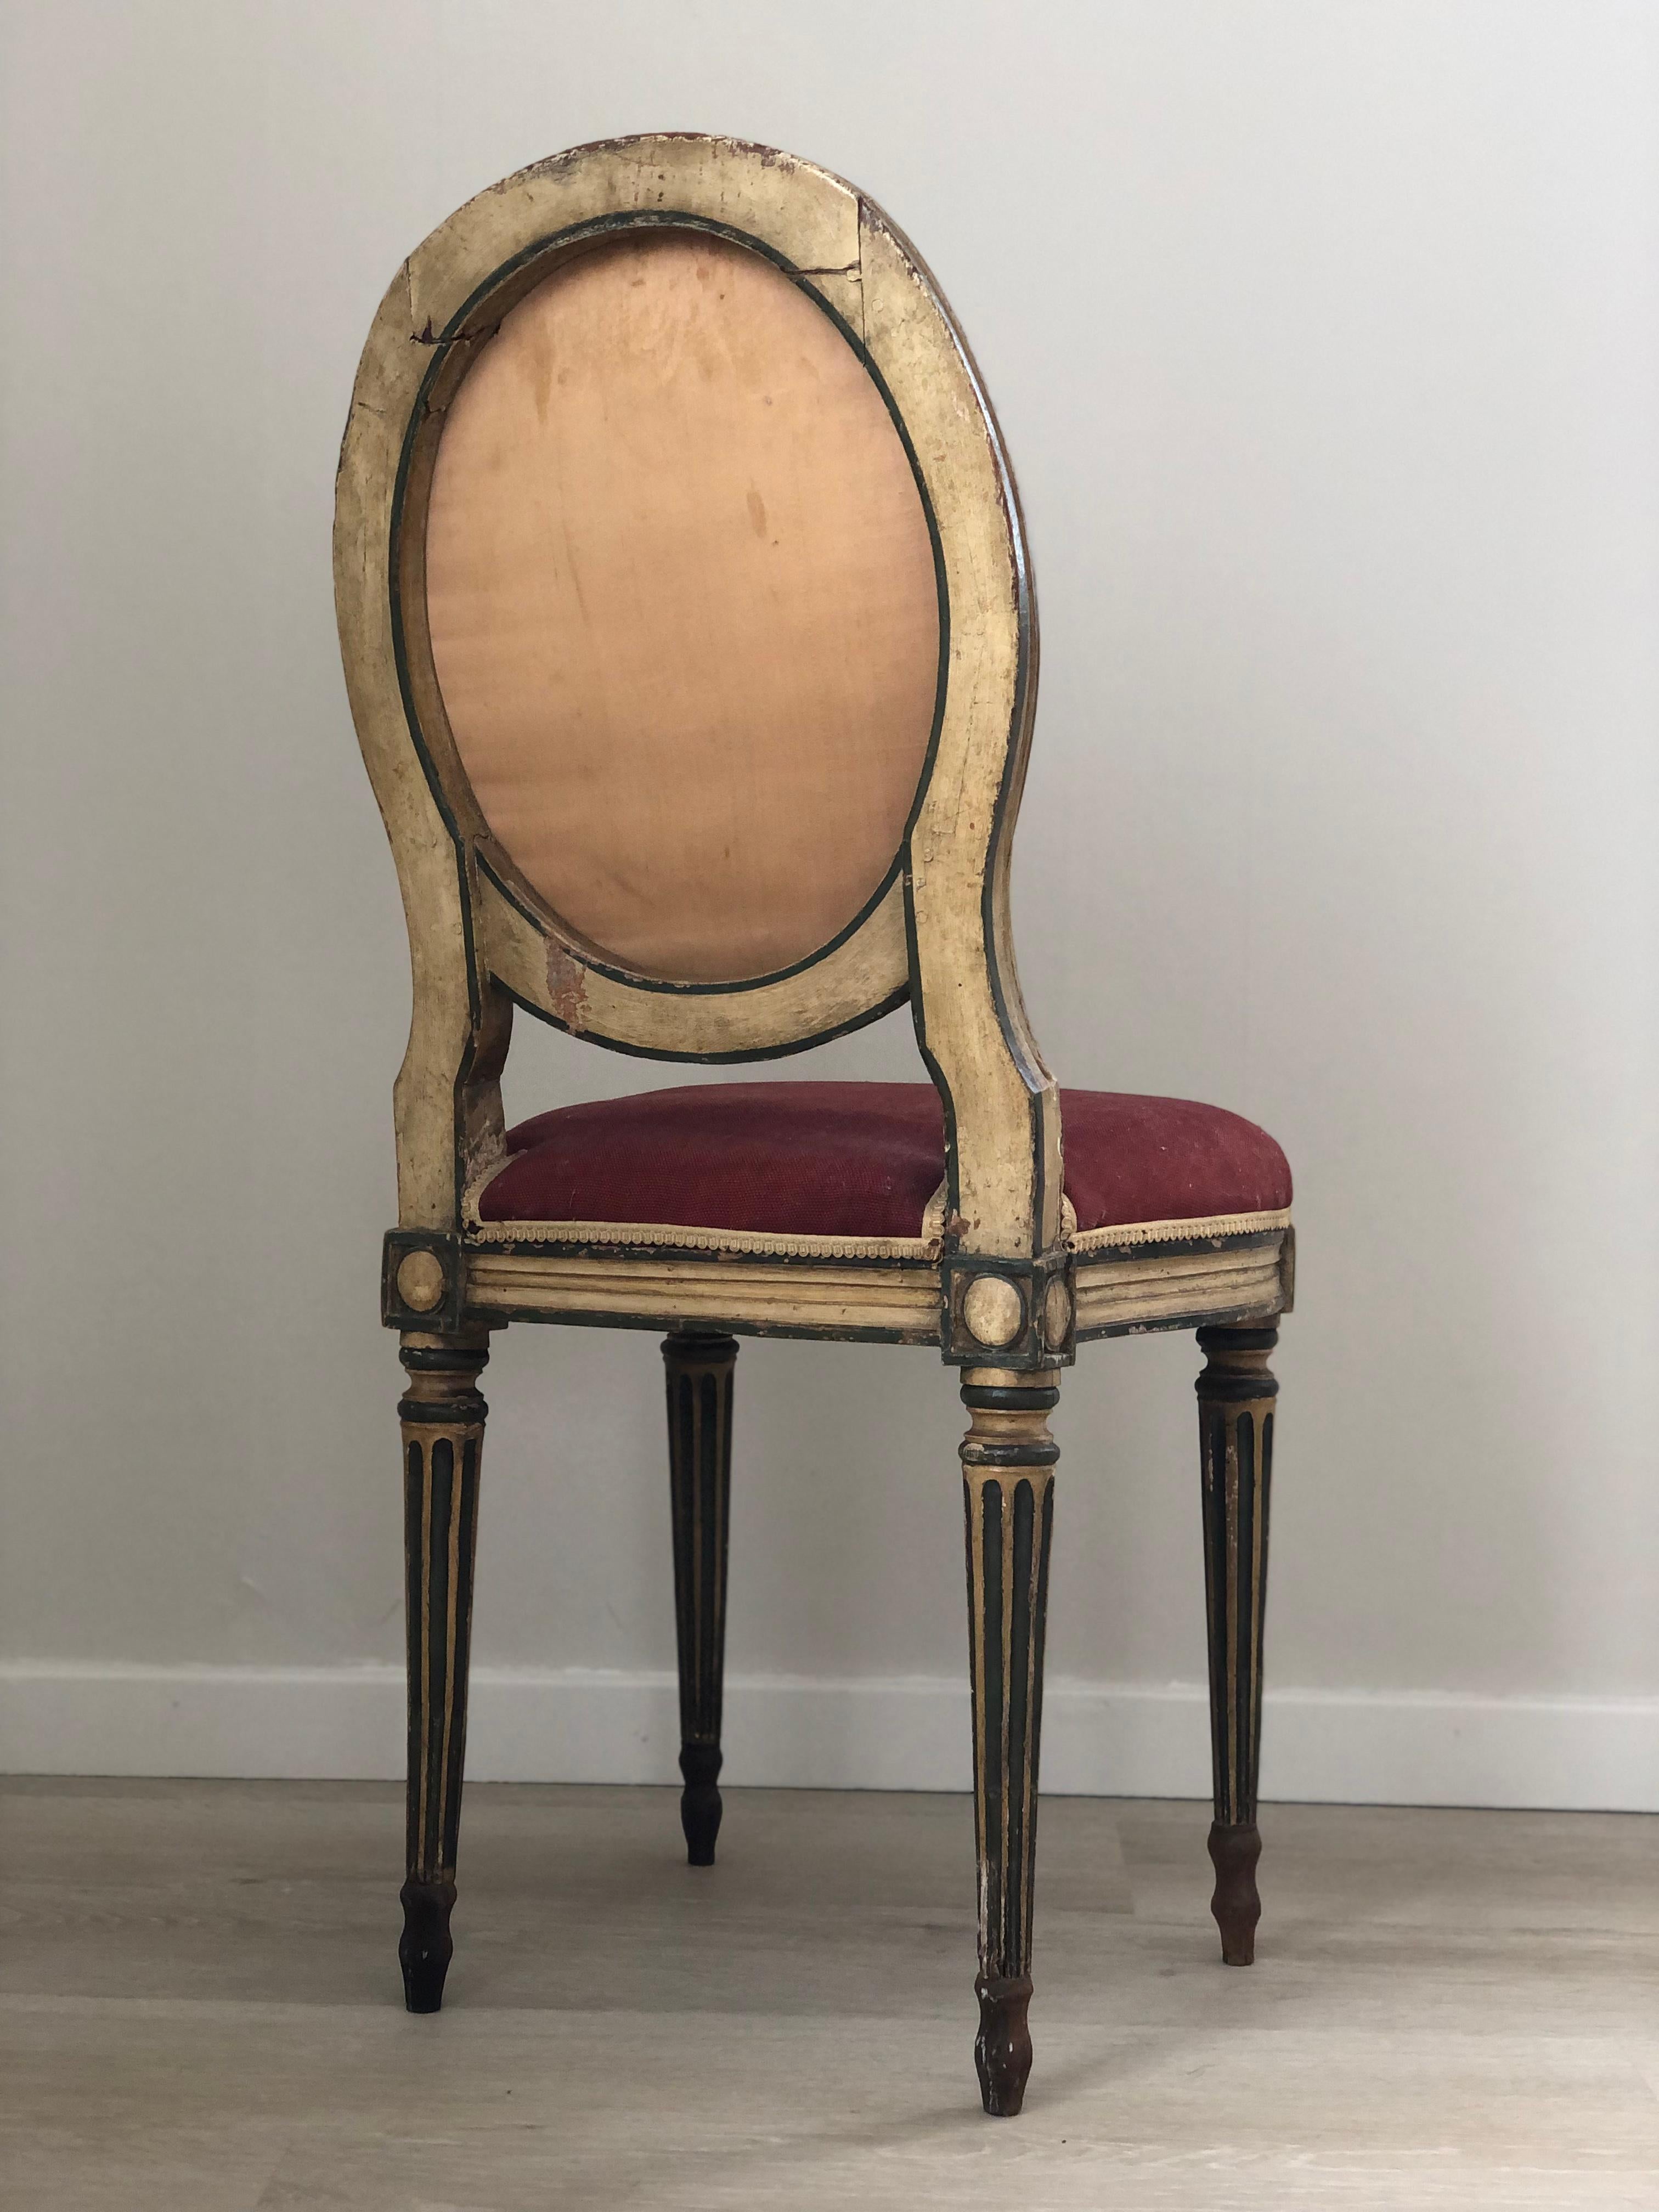 A richly carved Louis Seize medallion chair covered with a red sturdy fabric. The giltwood chair has green accents. In original condition, late 19th century from France.

Object: Chair
Designer: Unknown
Style: Antique, Louis Seize
Period: